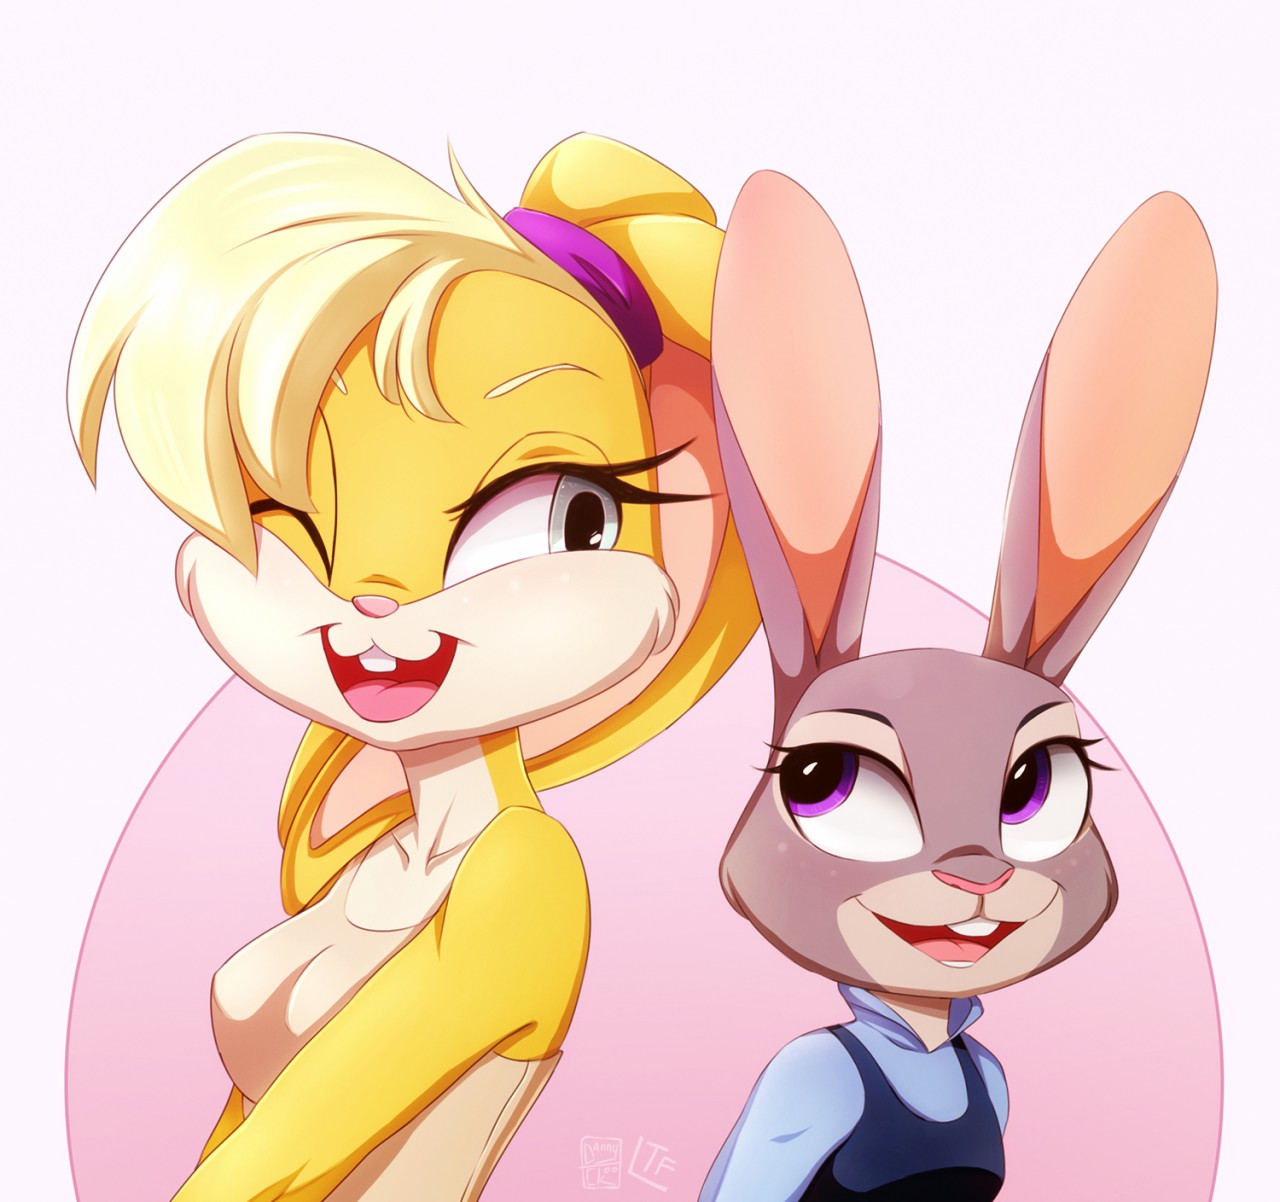 Art of the Day #426: Bunnies, and More Bunnies - Zootopia Ne